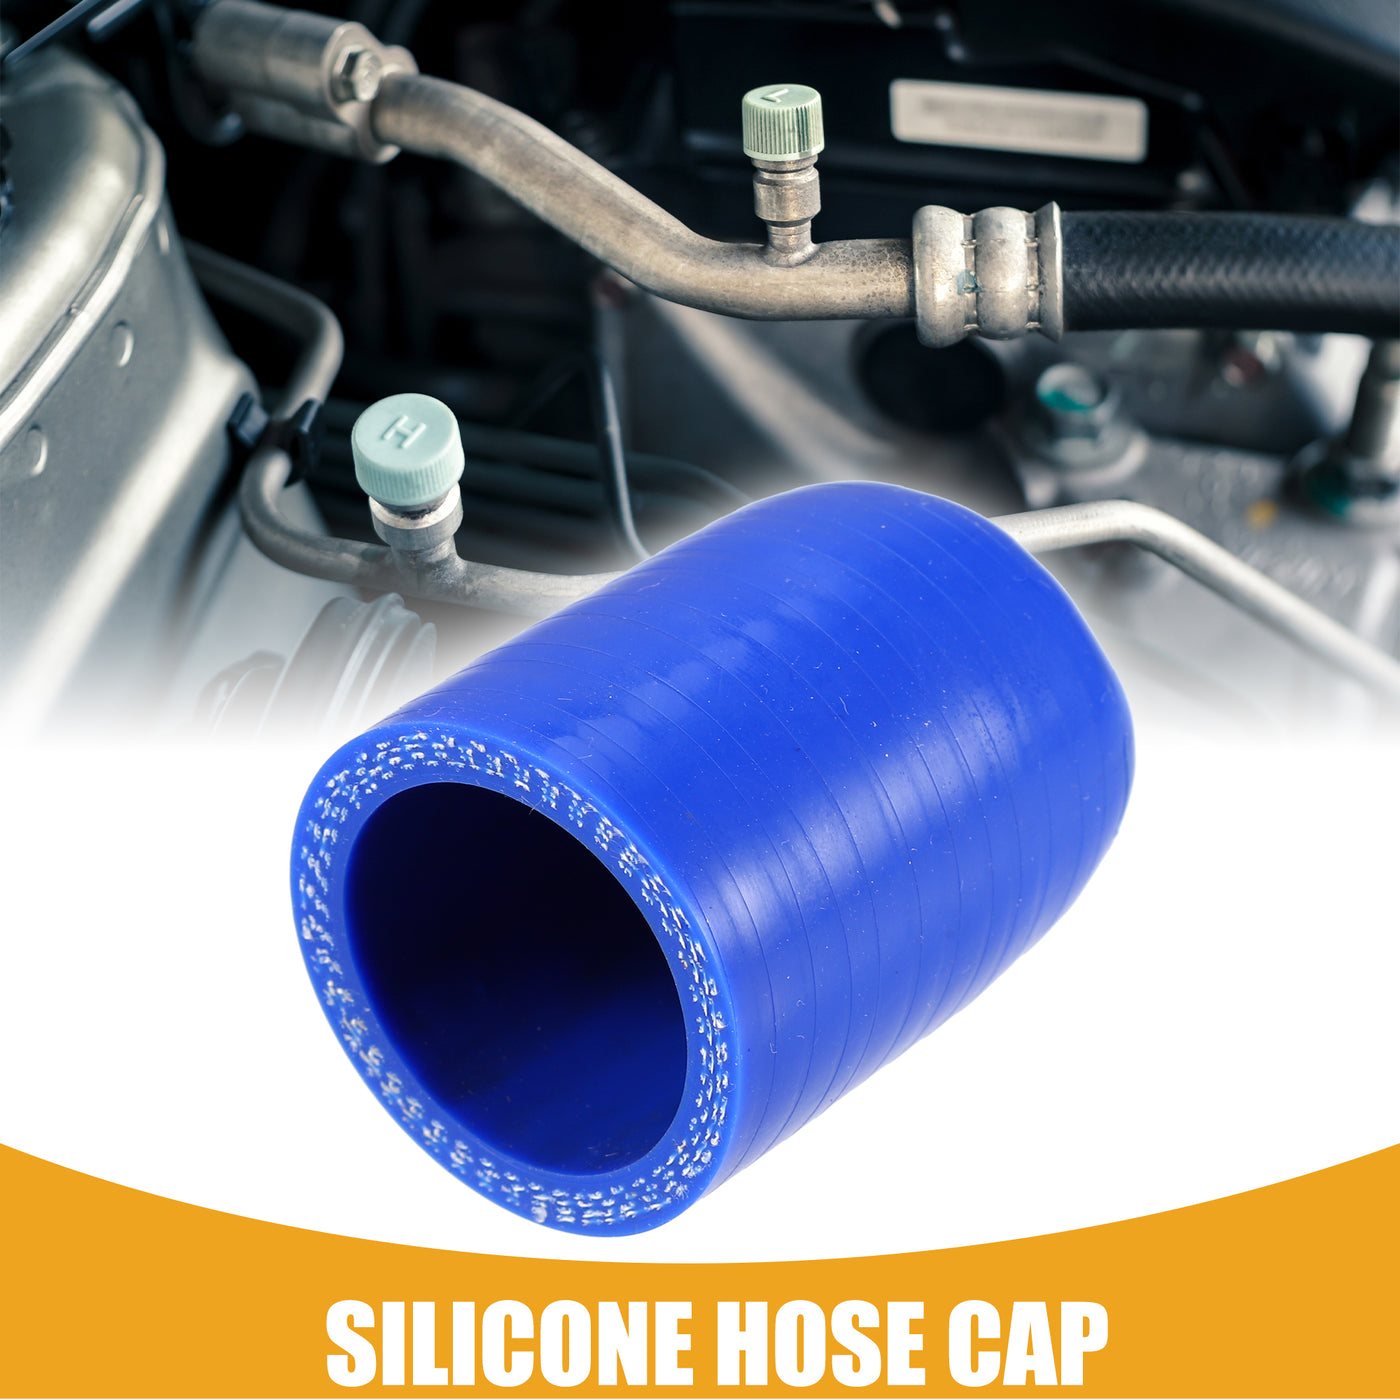 Partuto 1Pc 35mm 1.38" ID Universal Silicone Coolant Cap Intake Vacuum Hose End Plug - Car for Coolant Heater Bypass Vacuum Water Port - Silicone Blue